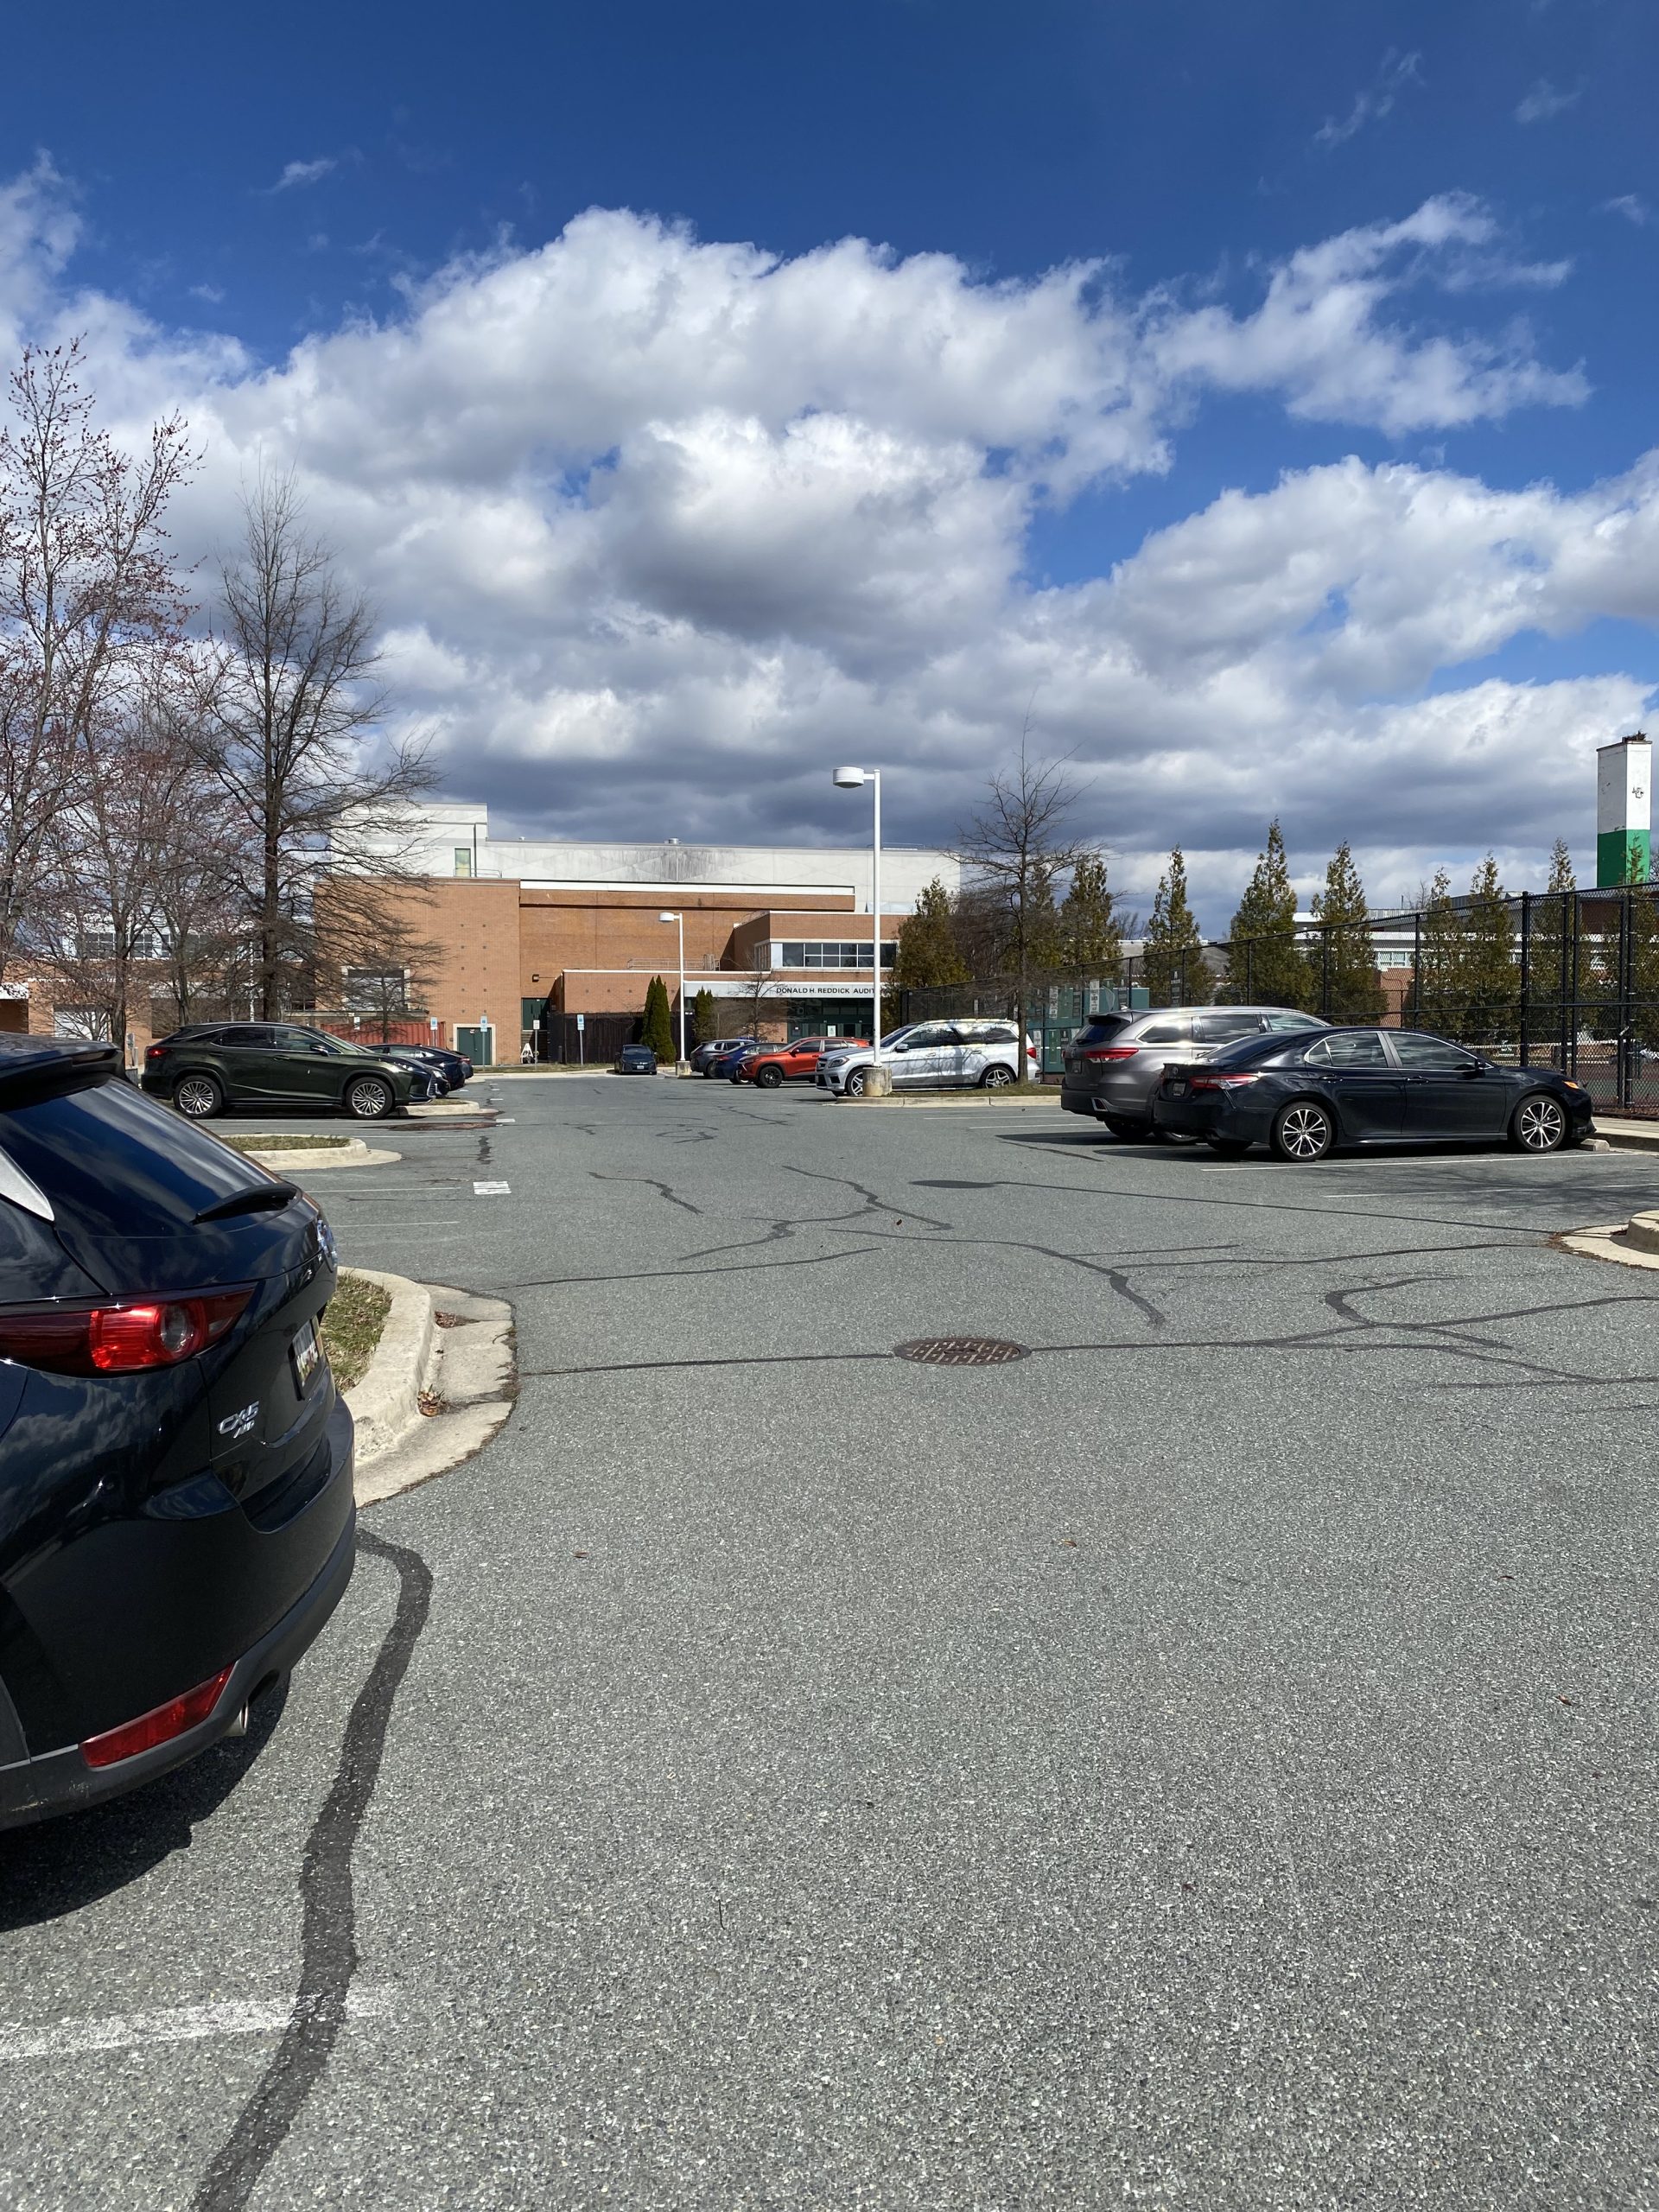 Despite it being a Sunday, with most students relaxing at home, some cars are still parked in the WJ parking lot. Nevertheless, there were plenty of empty spots to practice parking.